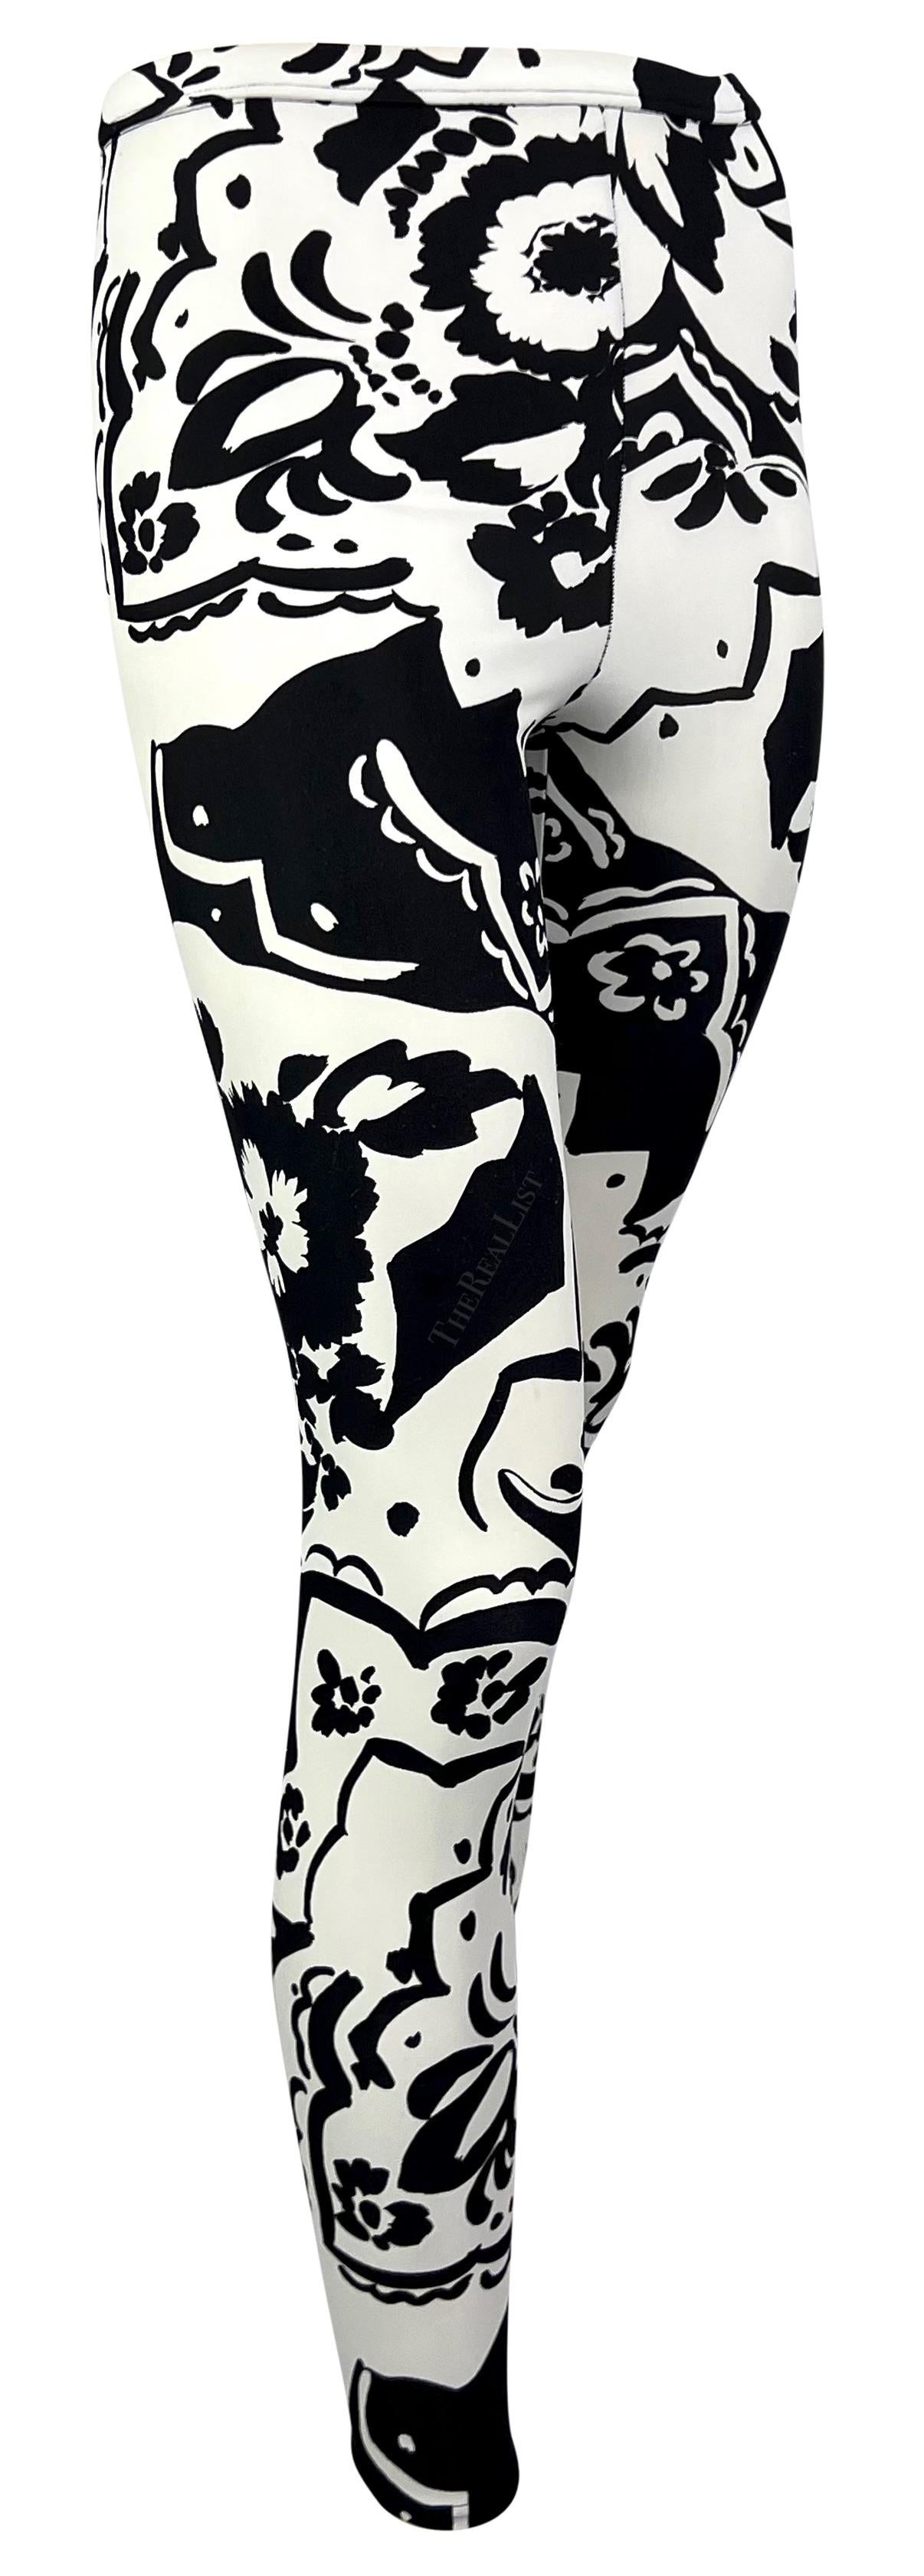 1990 Gianni Versace Black White Abstract Floral Leggings Tights For Sale 2